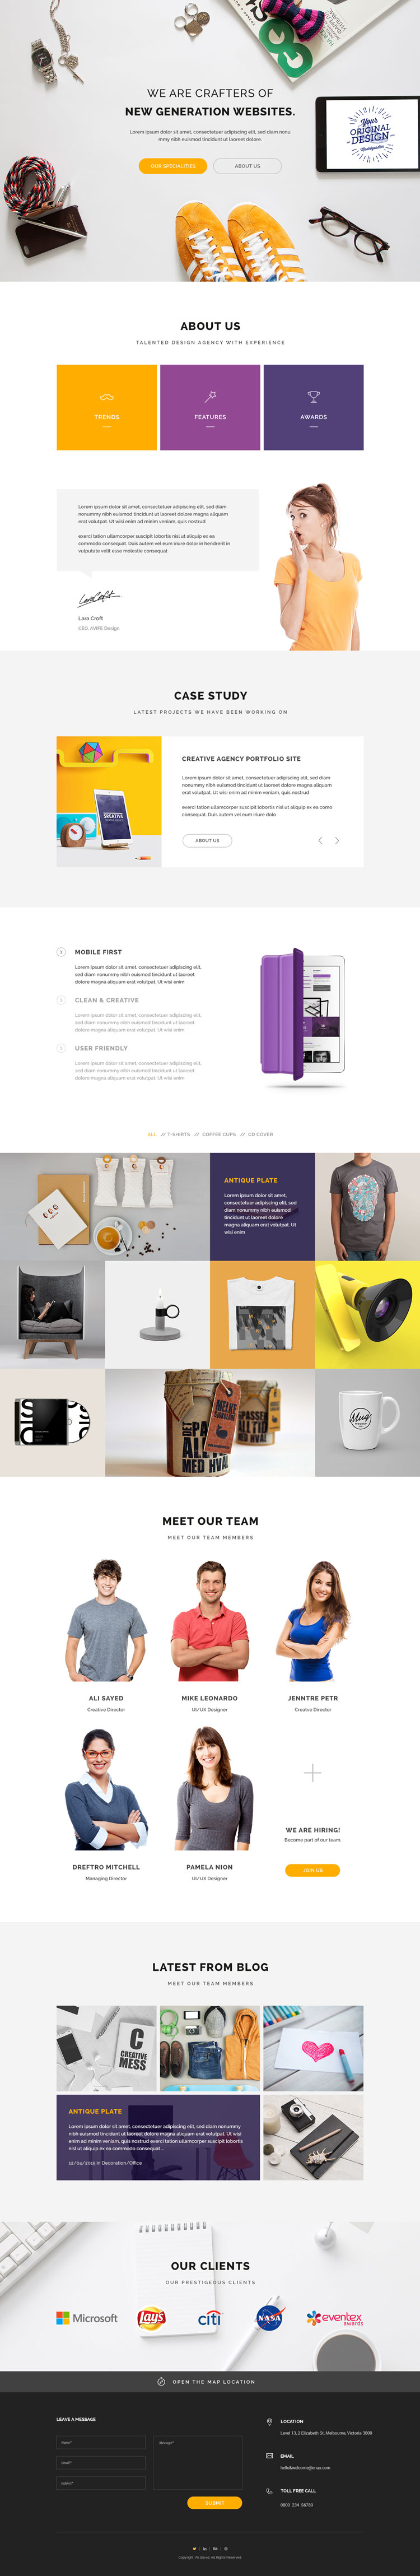 Creative-Newest-Website-Designs-for-Inspiration-003